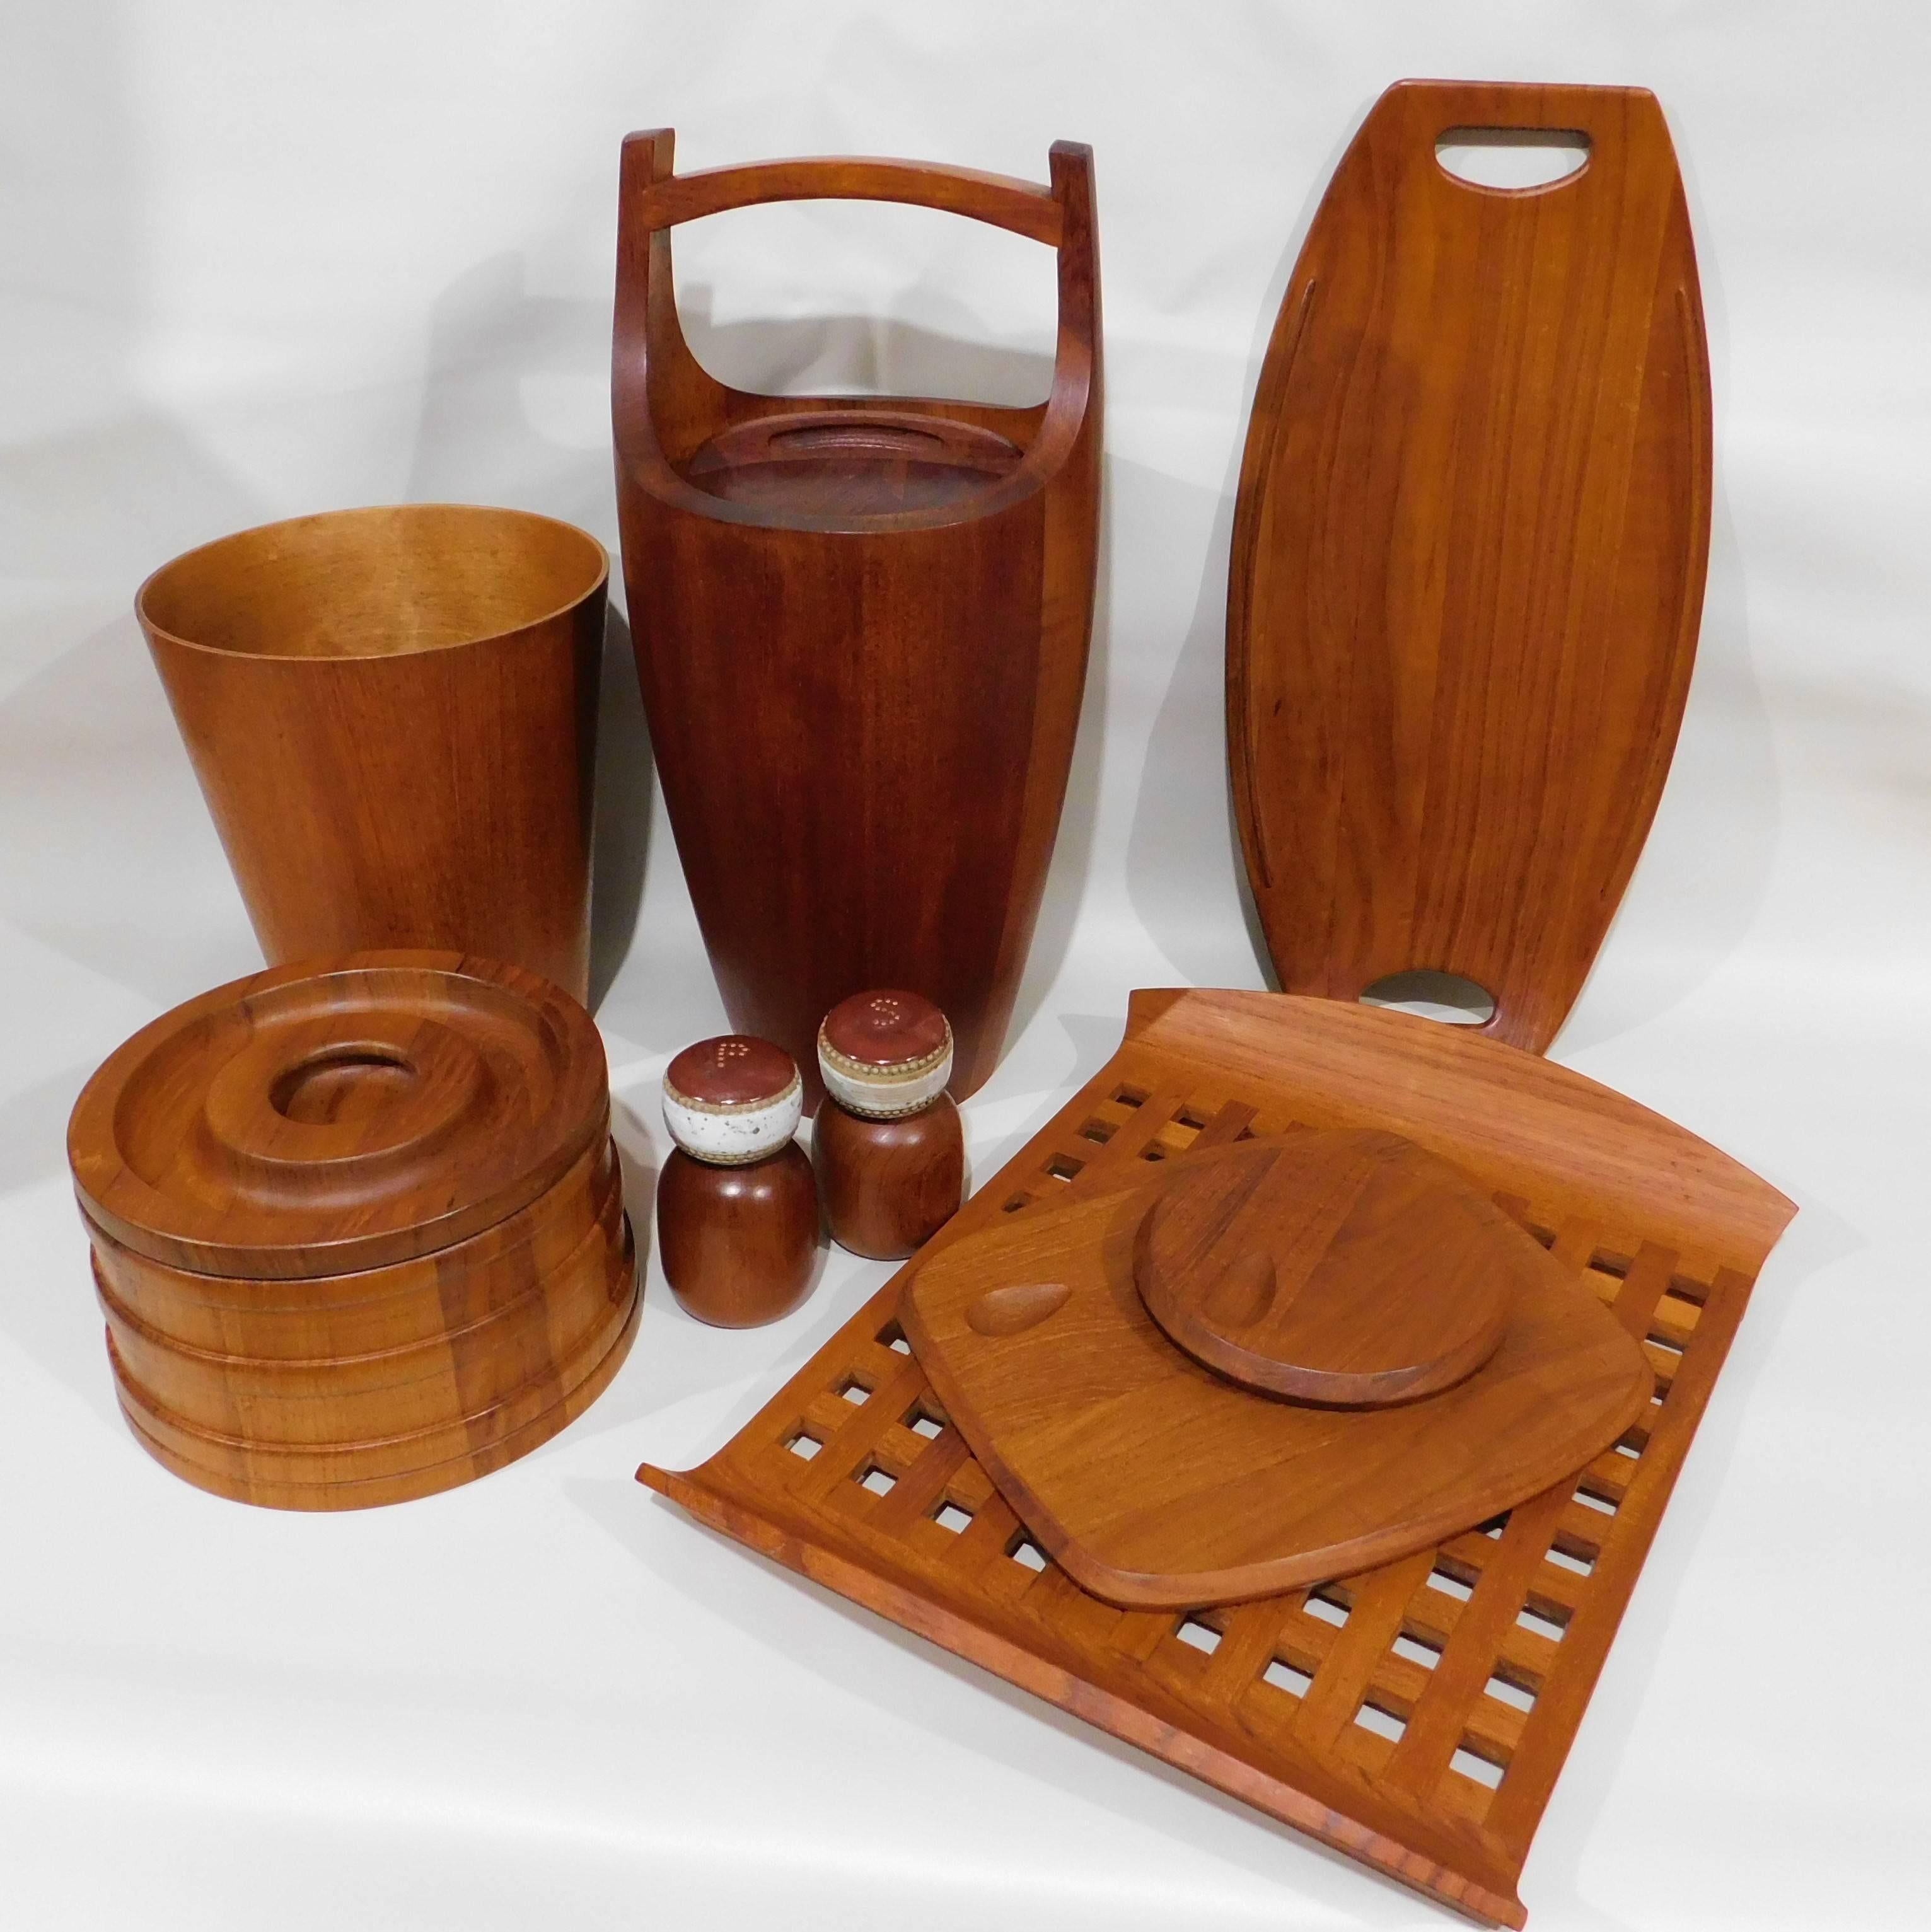 This nine-piece Mid Century teak set includes
-2 Jens Quistgaard ice buckets, measuring 20 inches high x 8.5 inches round and 5.5 inches high x 9 inches round. 
-2 Jens Quistgaard serving trays, 2 inches high x 20.5 inches long x 9.88 and 2.75